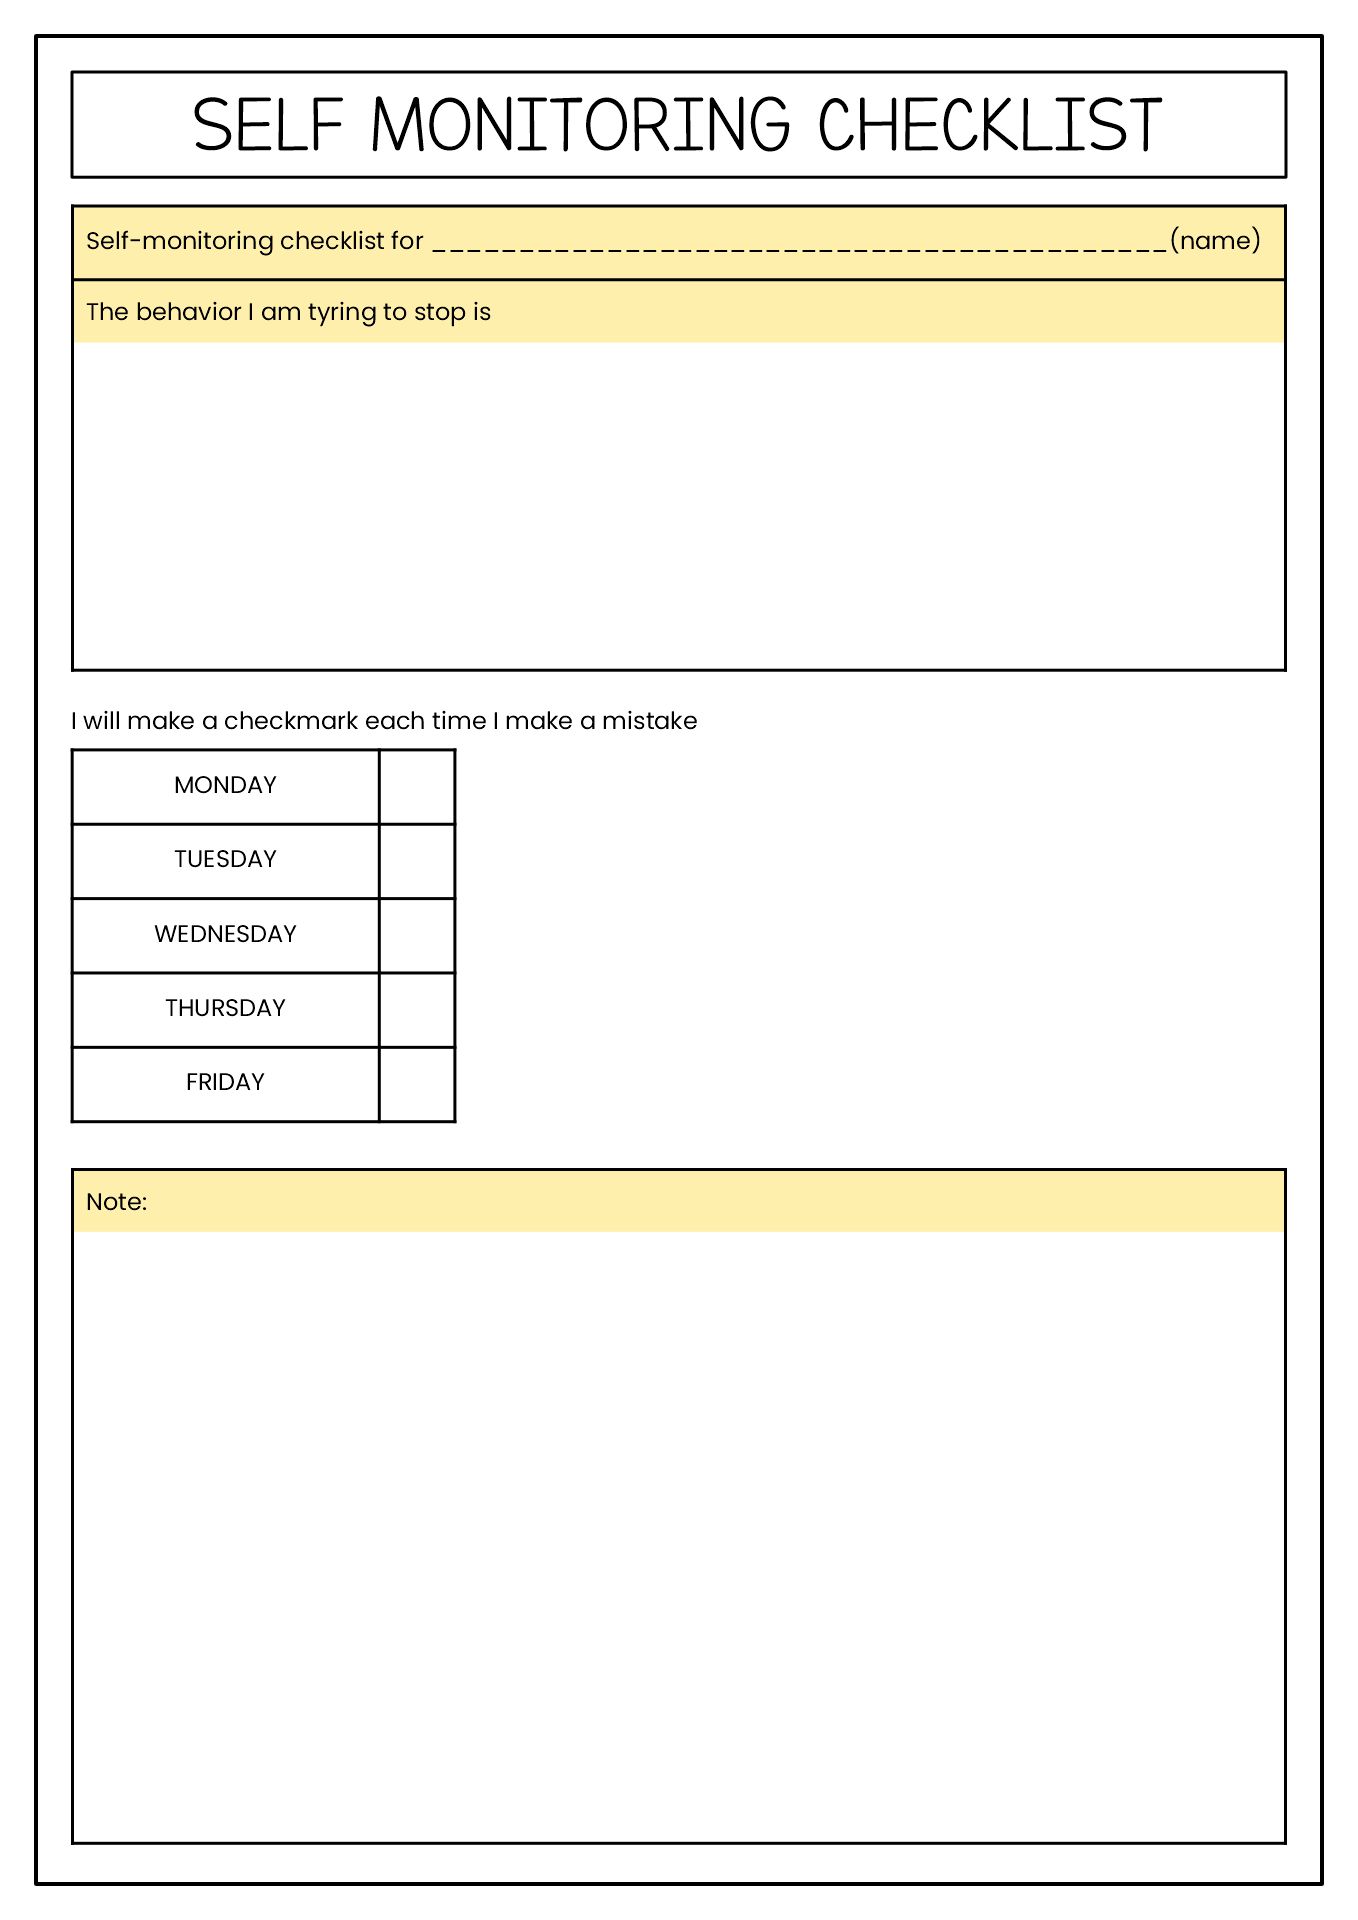 18 Best Images of Group Therapy Mental Health Worksheets ...